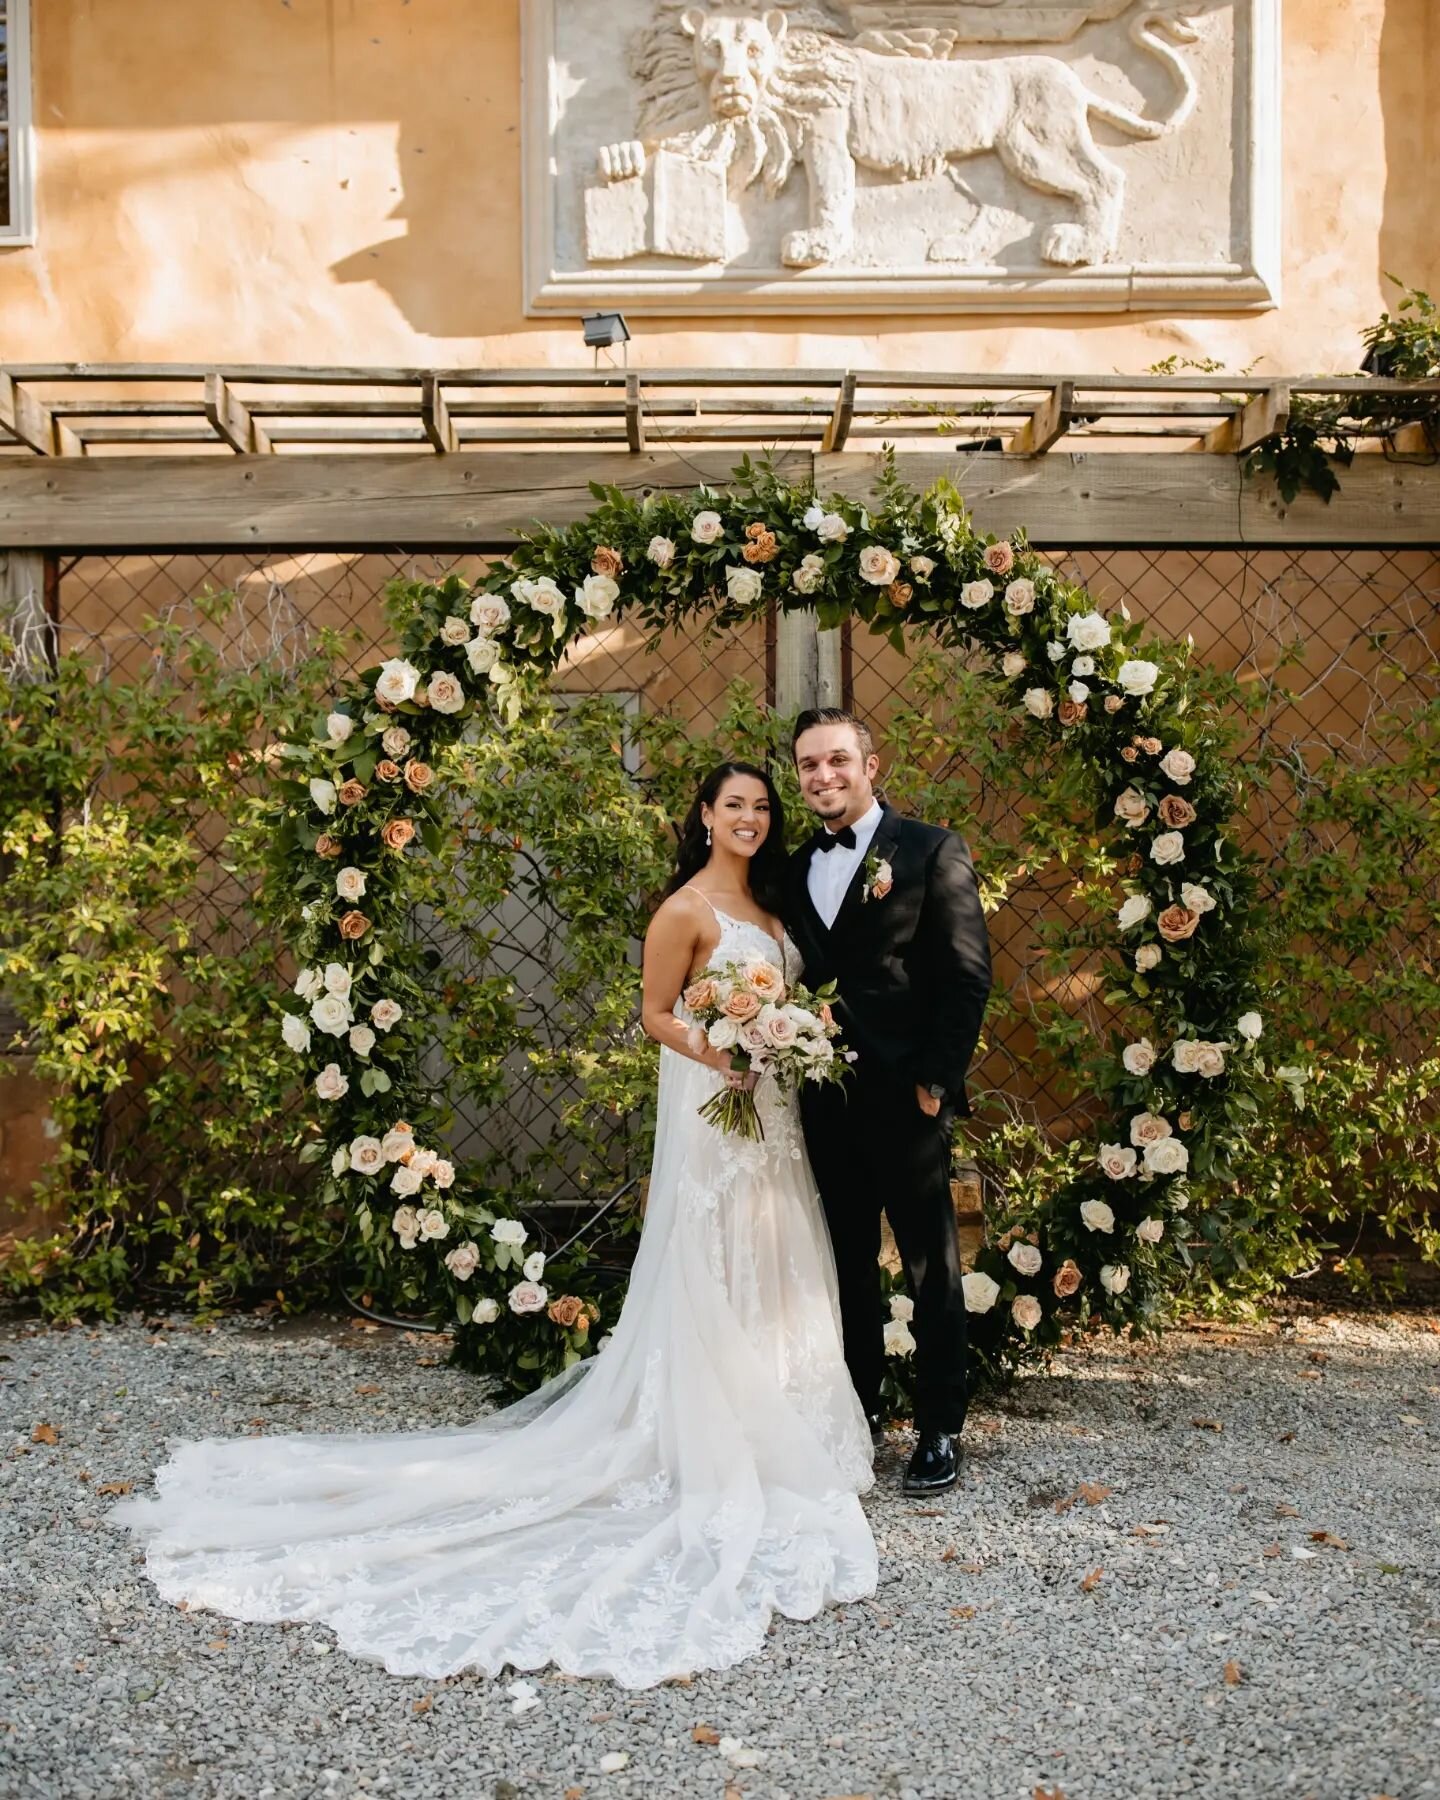 Mr. &amp; Mrs. Palacio
10. 22. 22
Congratulations Kourtnee &amp; Stefan! What a beautiful day. So many moments that these two will cherish! We can't wait to share more of their day! Here's some faves of their wedding.  Too Many to share with just 10 